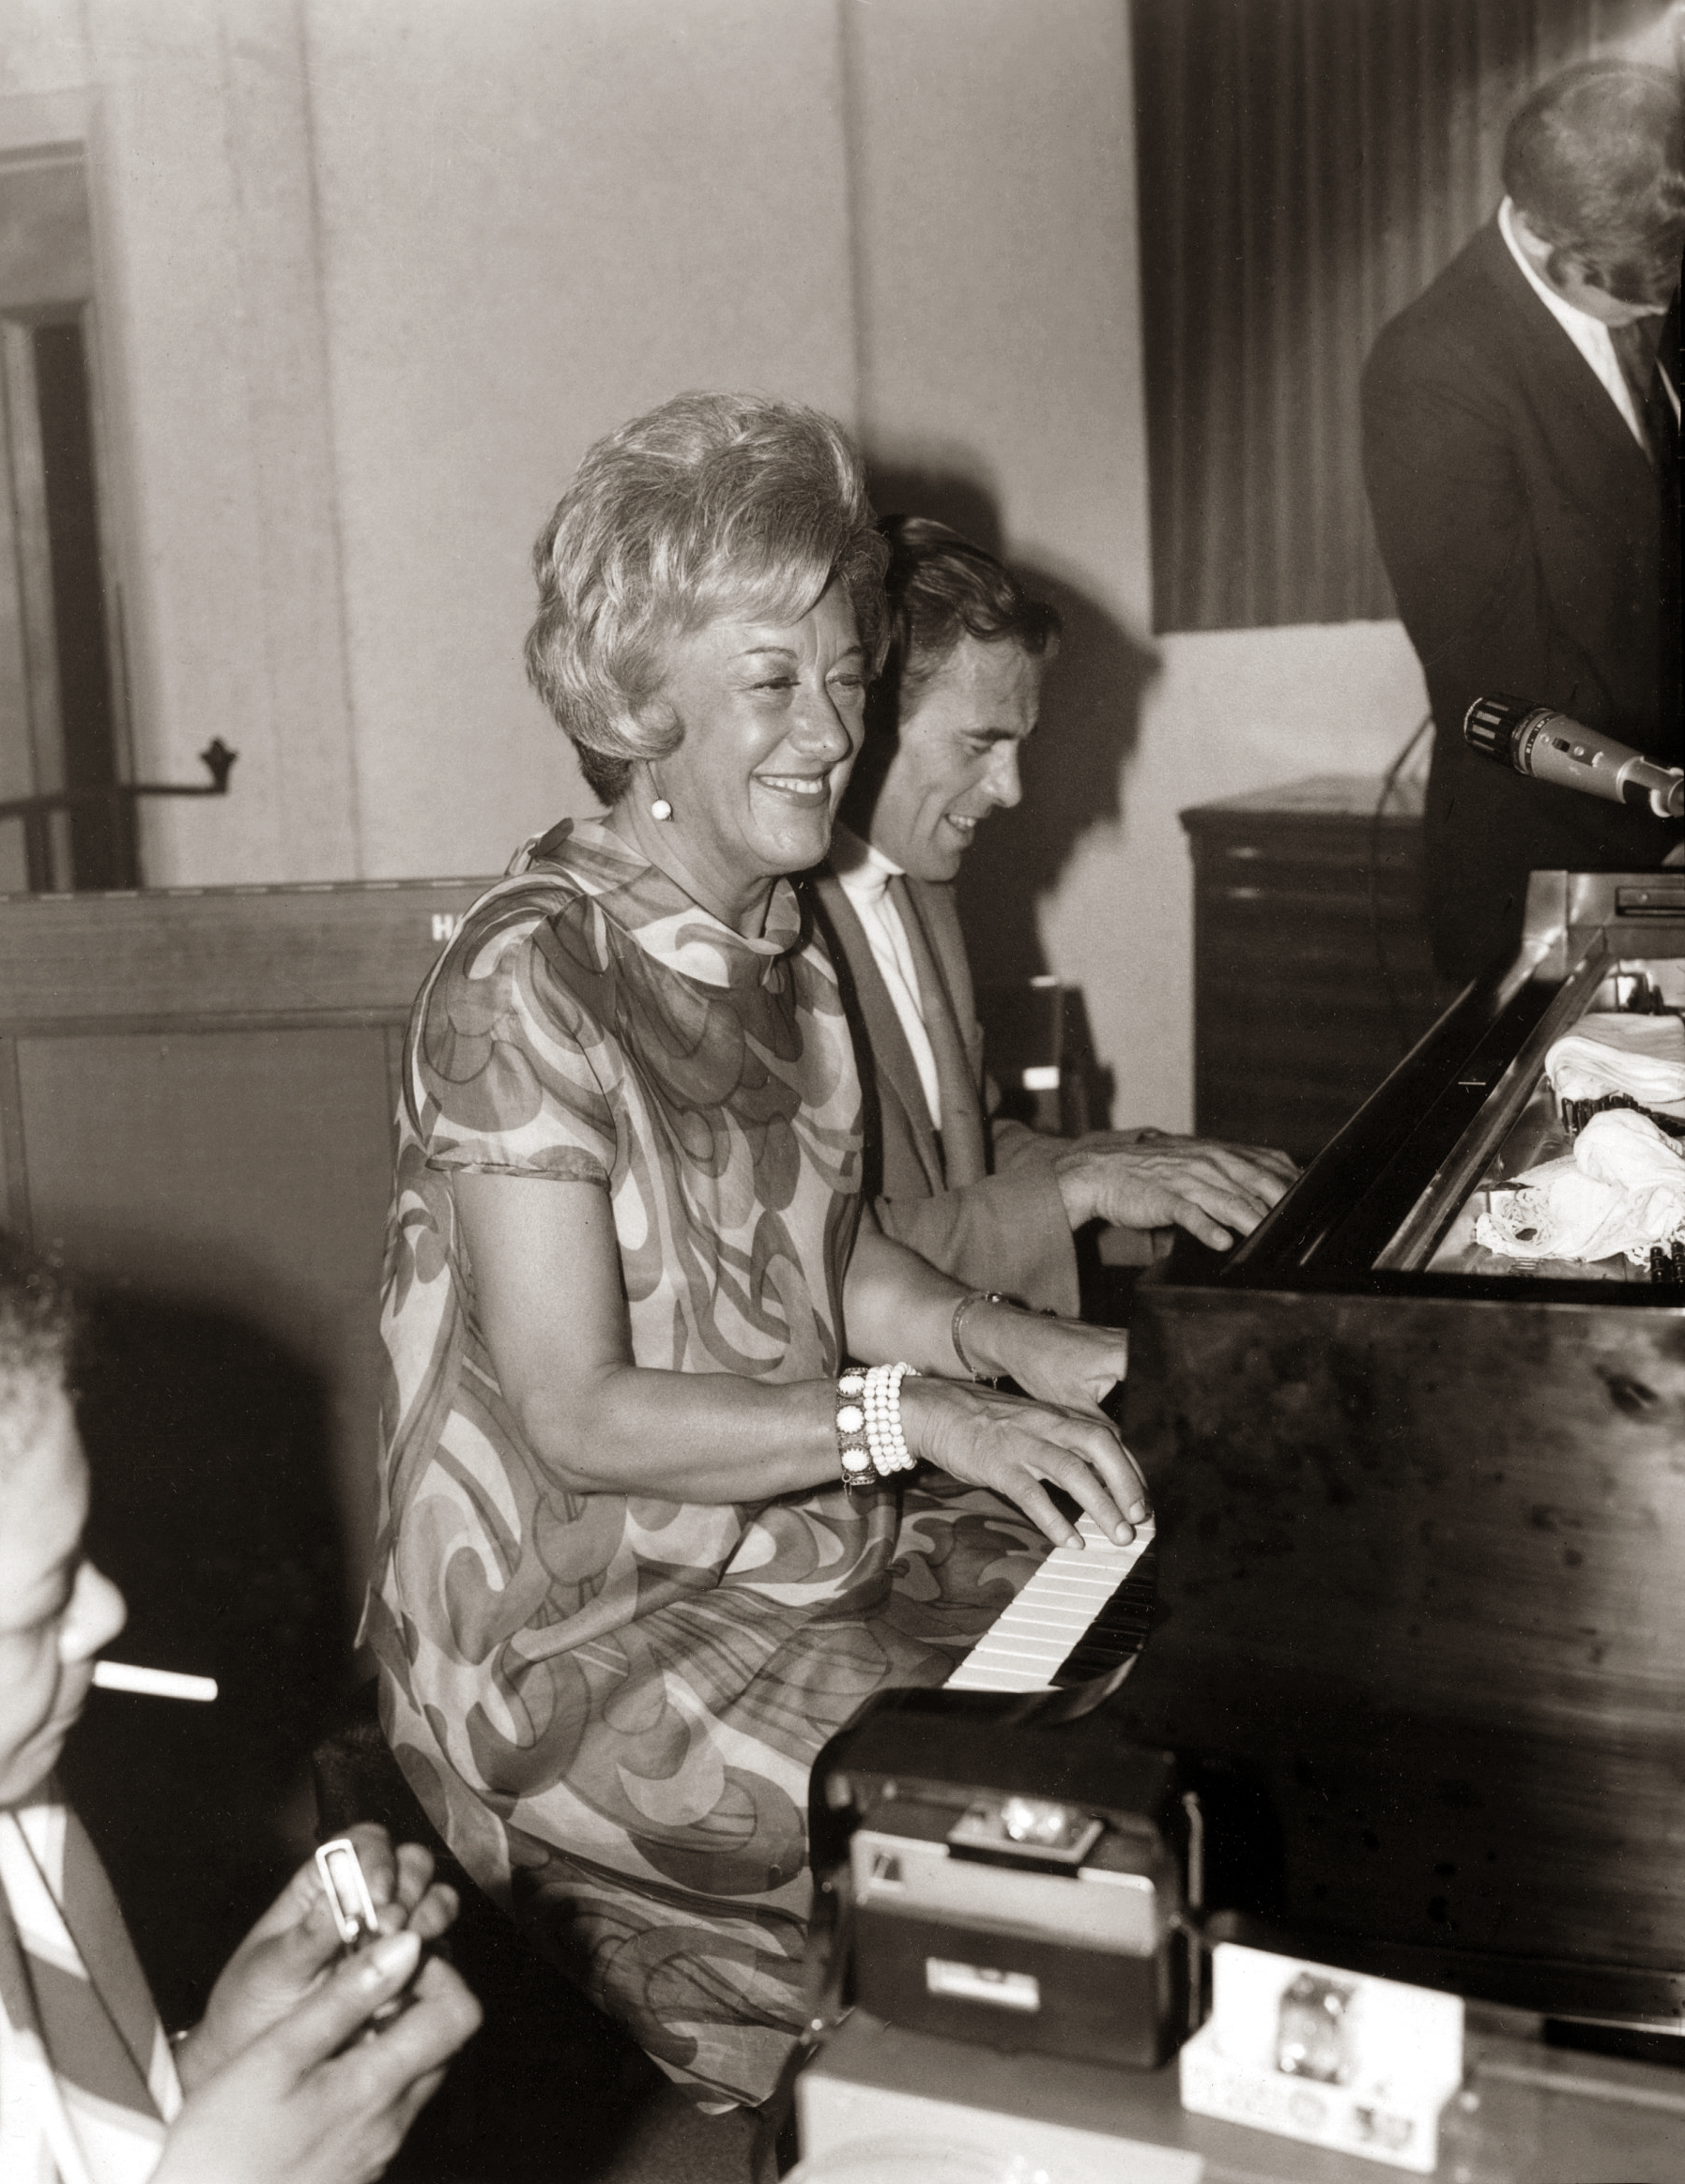 Marian McPartland and Linc Milliman playing piano at Doug Duke’s “Music Room” on the corner of Lake Avenue and Latta Road in Rochester, New York